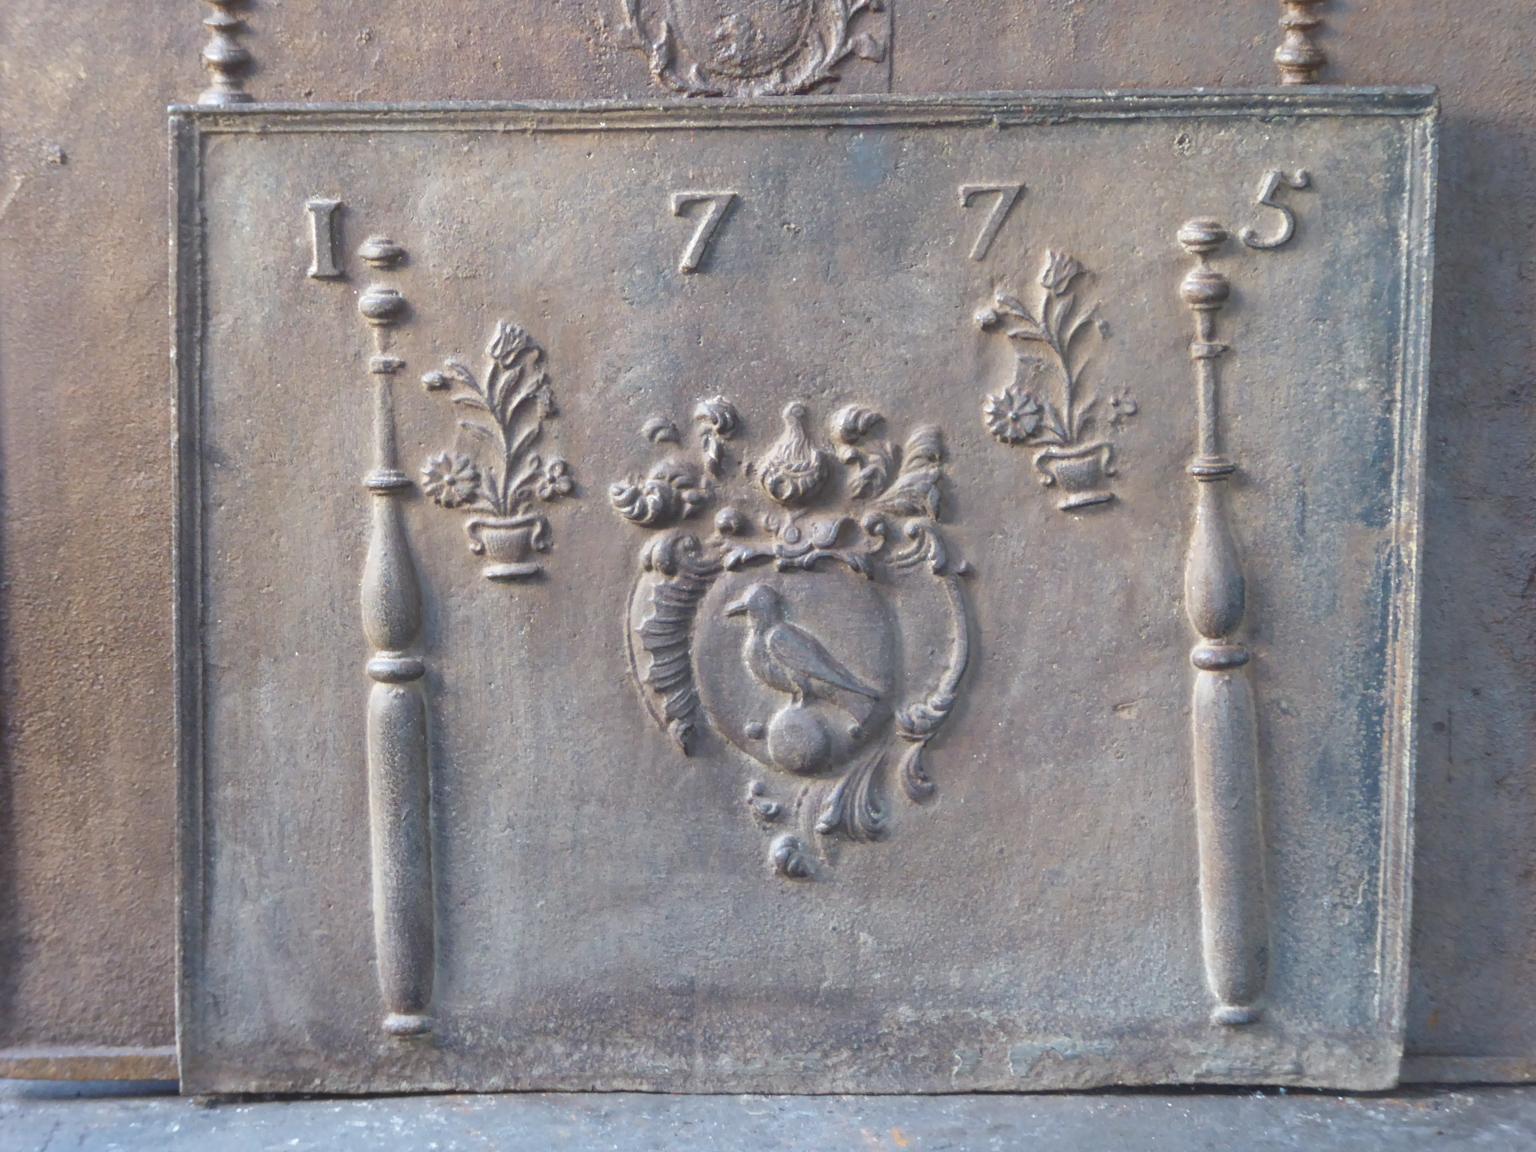 Beautiful 18th century French Louis XIV fireback with an unknown coat of arms. The coat of arms is flanked by two Pillars of Hercules, which symbolize strength and the unknown. The date of production of the fireback, 1775, is also cast in the